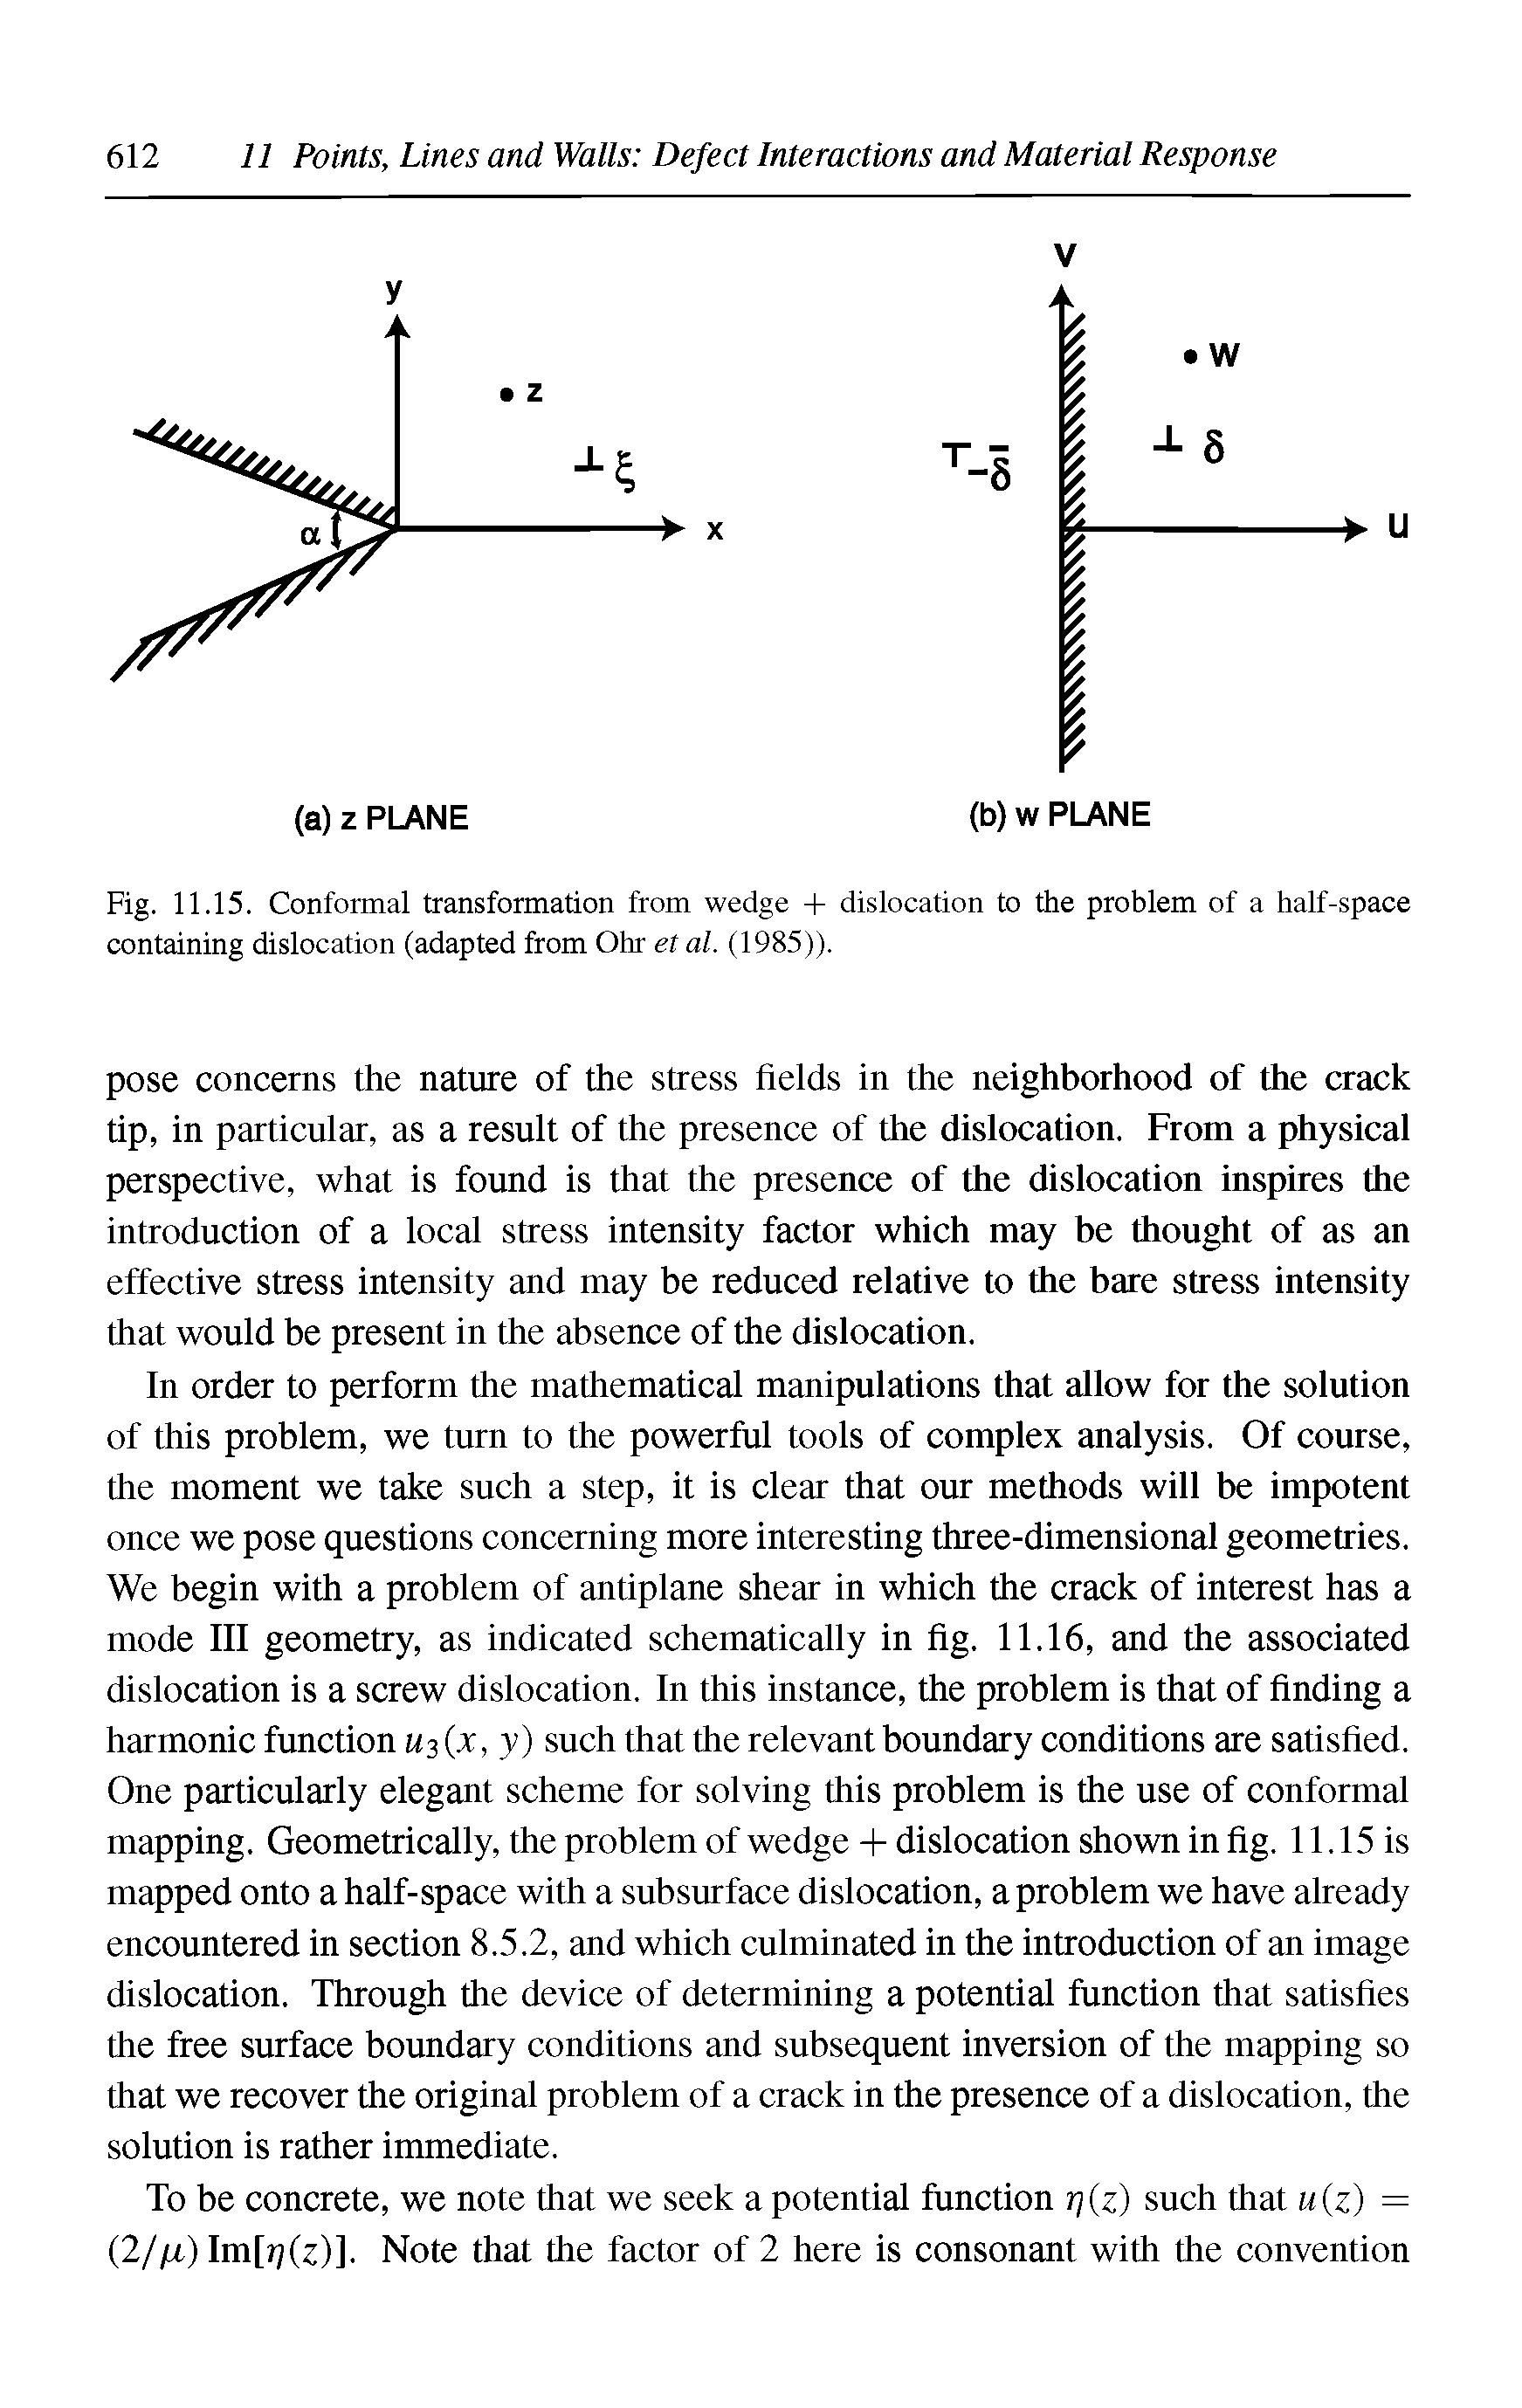 Fig. 11.15. Conformal transformation from wedge + dislocation to the problem of a half-space containing dislocation (adapted from Ohr et al. (1985)).